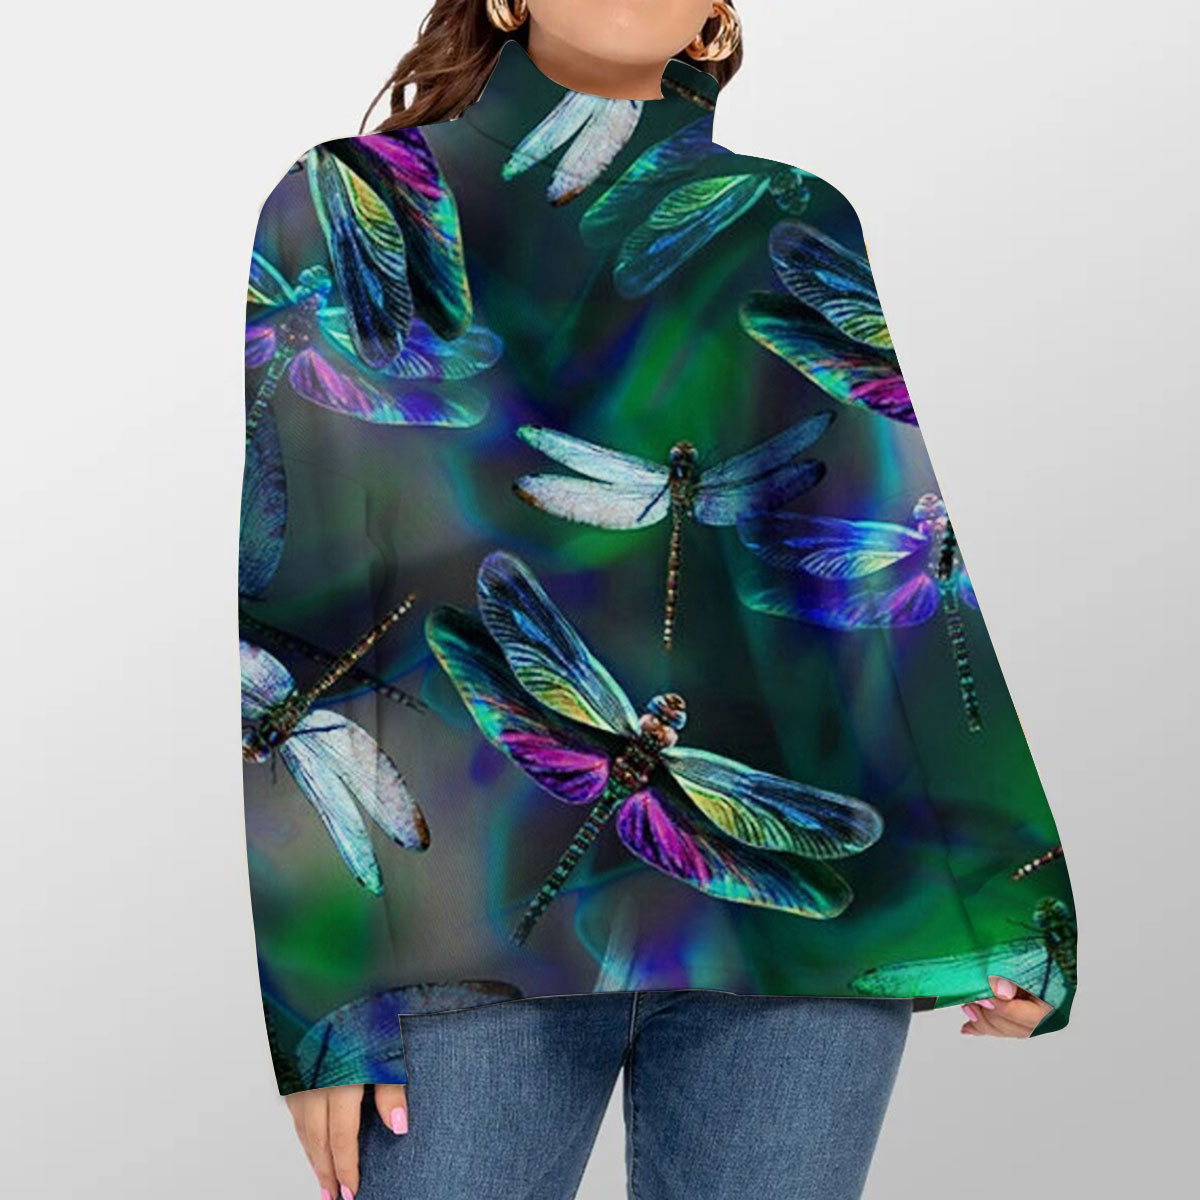 Colorful Dragonfly Turtleneck Sweater